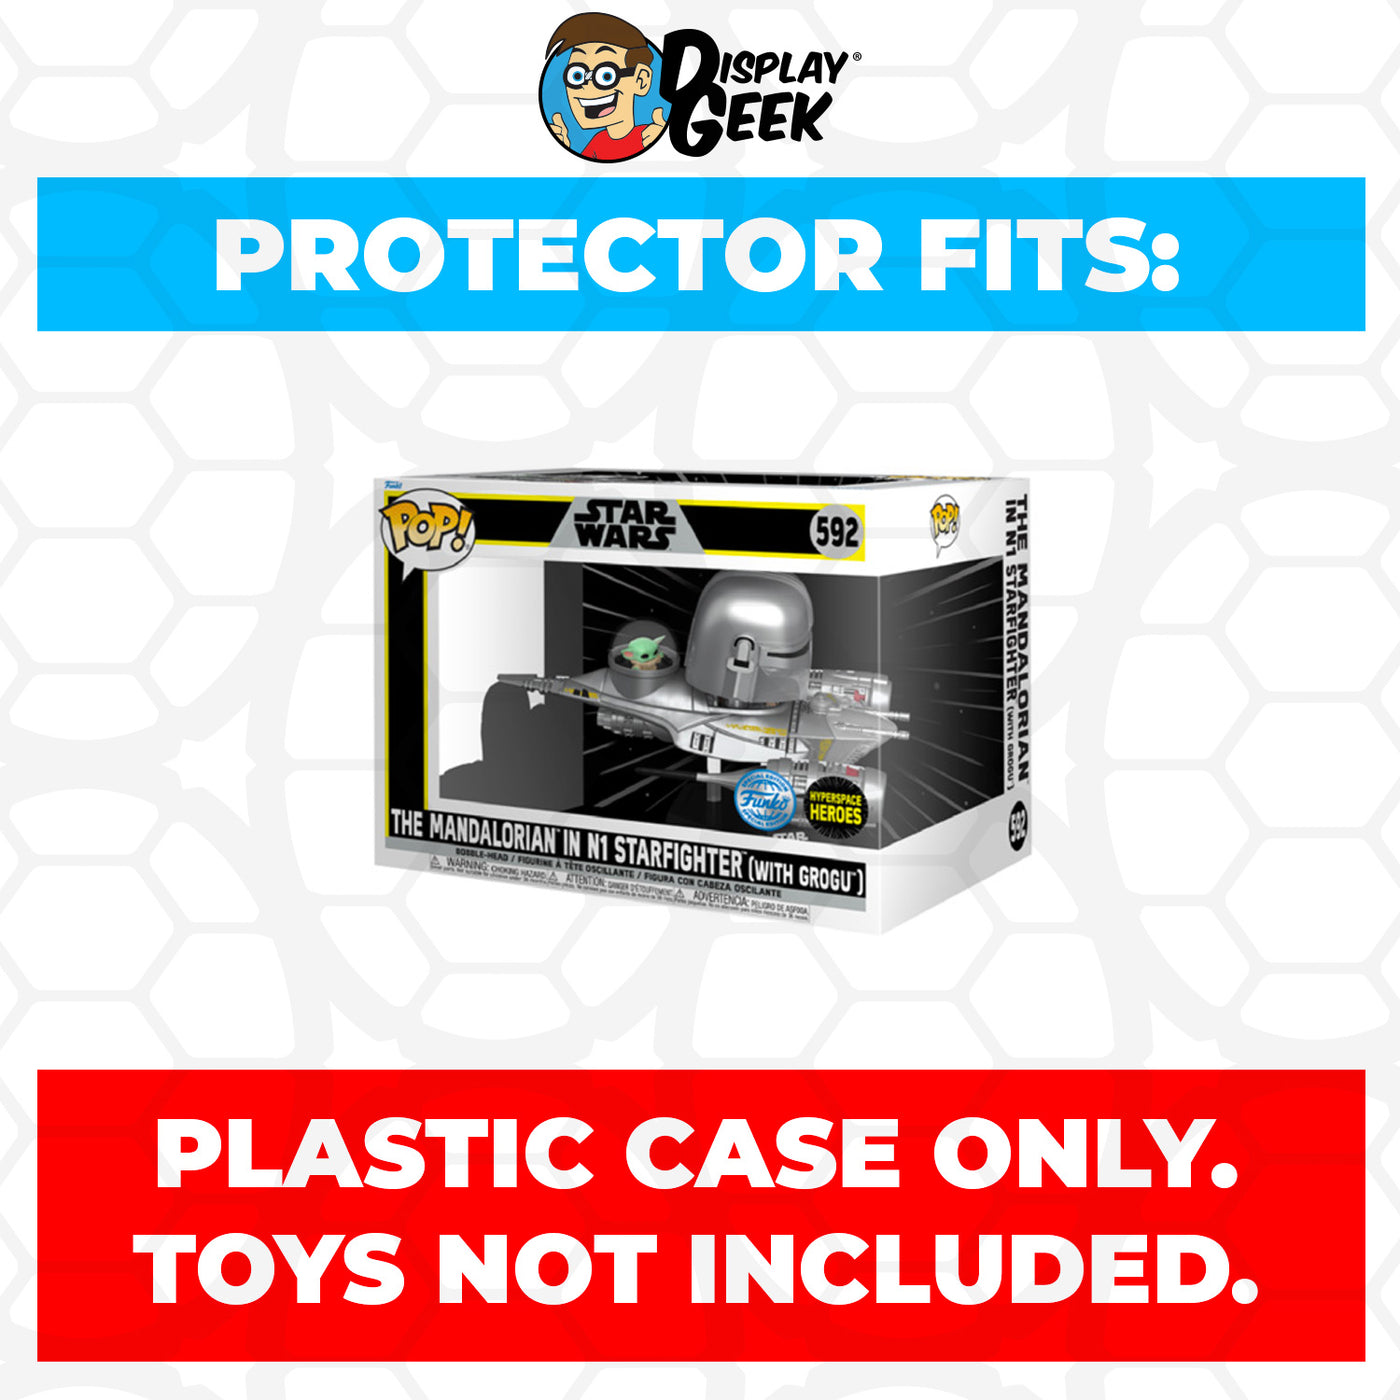 Pop Protector for The Mandalorian in N1 Starfighter with Grogu #592 Funko Pop Rides on The Protector Guide App by Display Geek